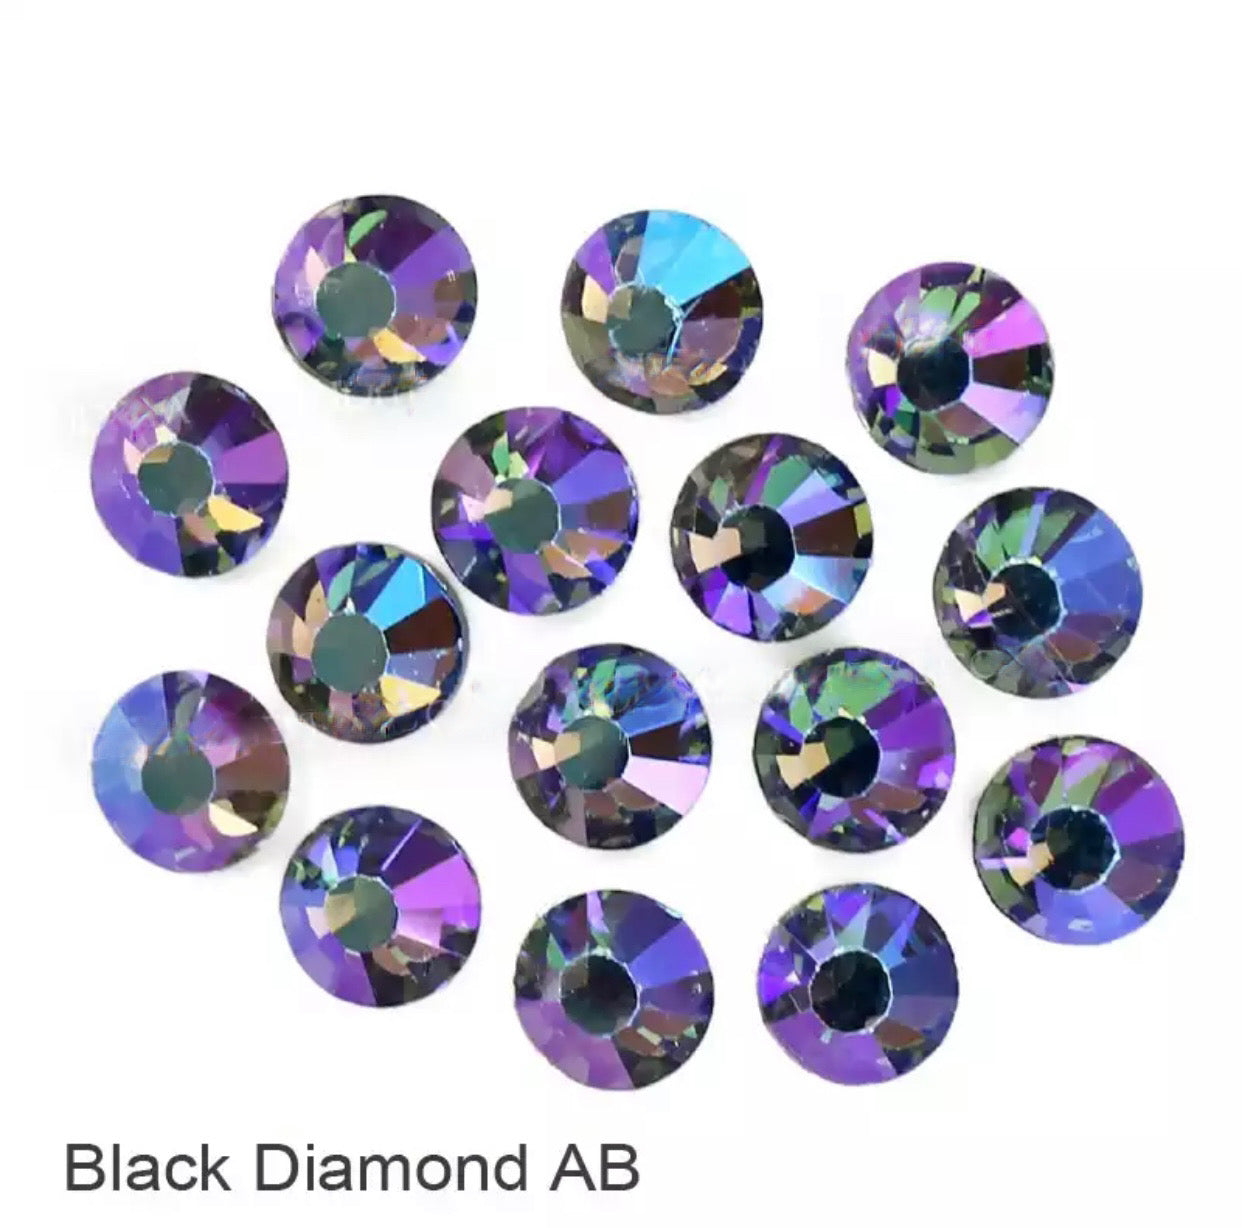 Highest Quality Crystals - Black Diamond AB - Mixed Sizes (SS3-SS20)